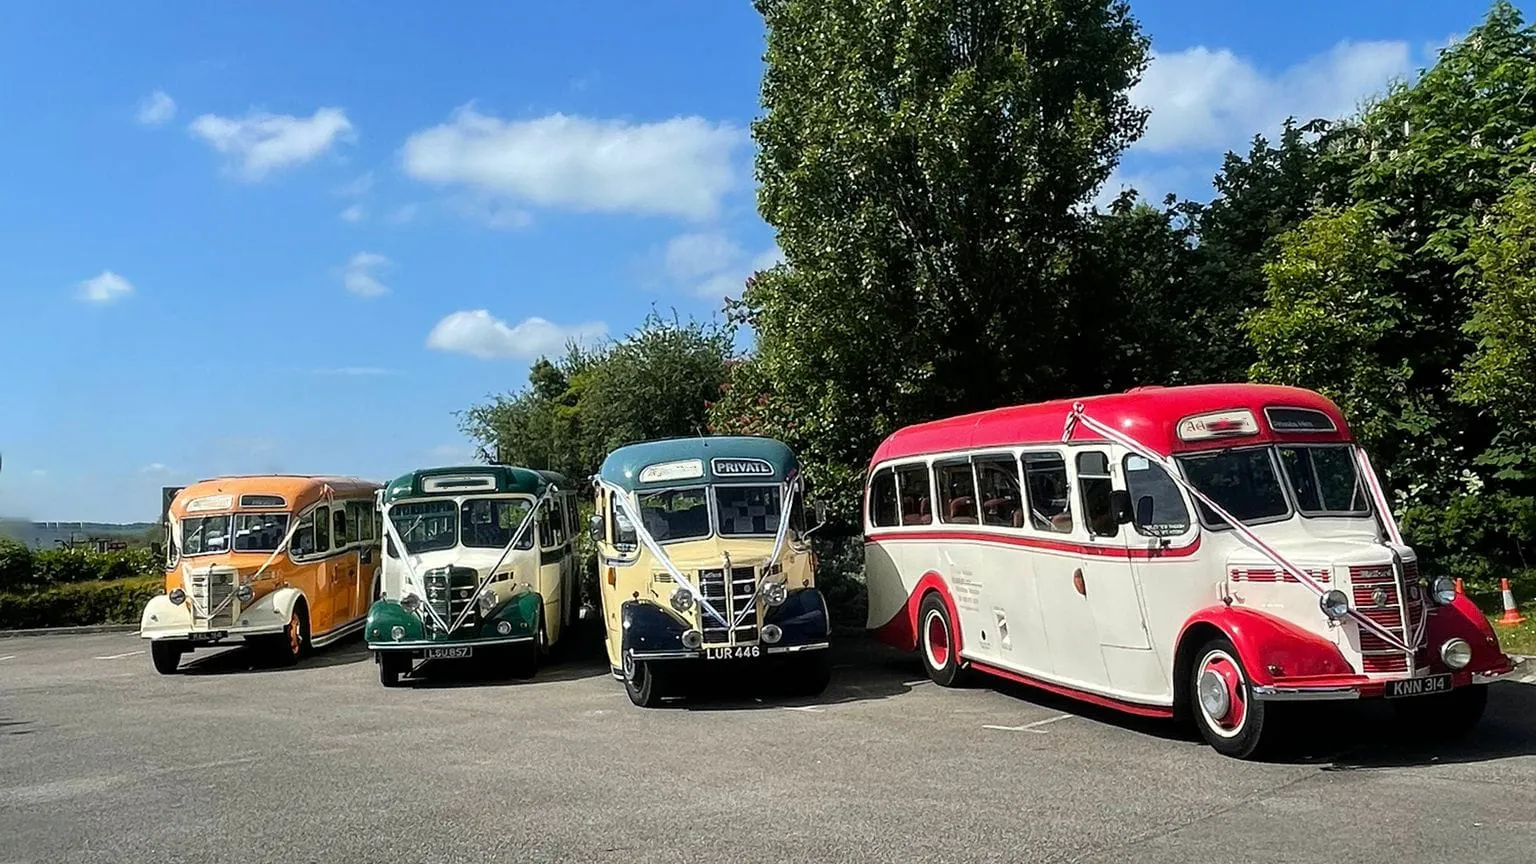 Four Single Decker Bedford Buses decorated with Matching Ribbons waiting for Wedding Guests to come out of venue